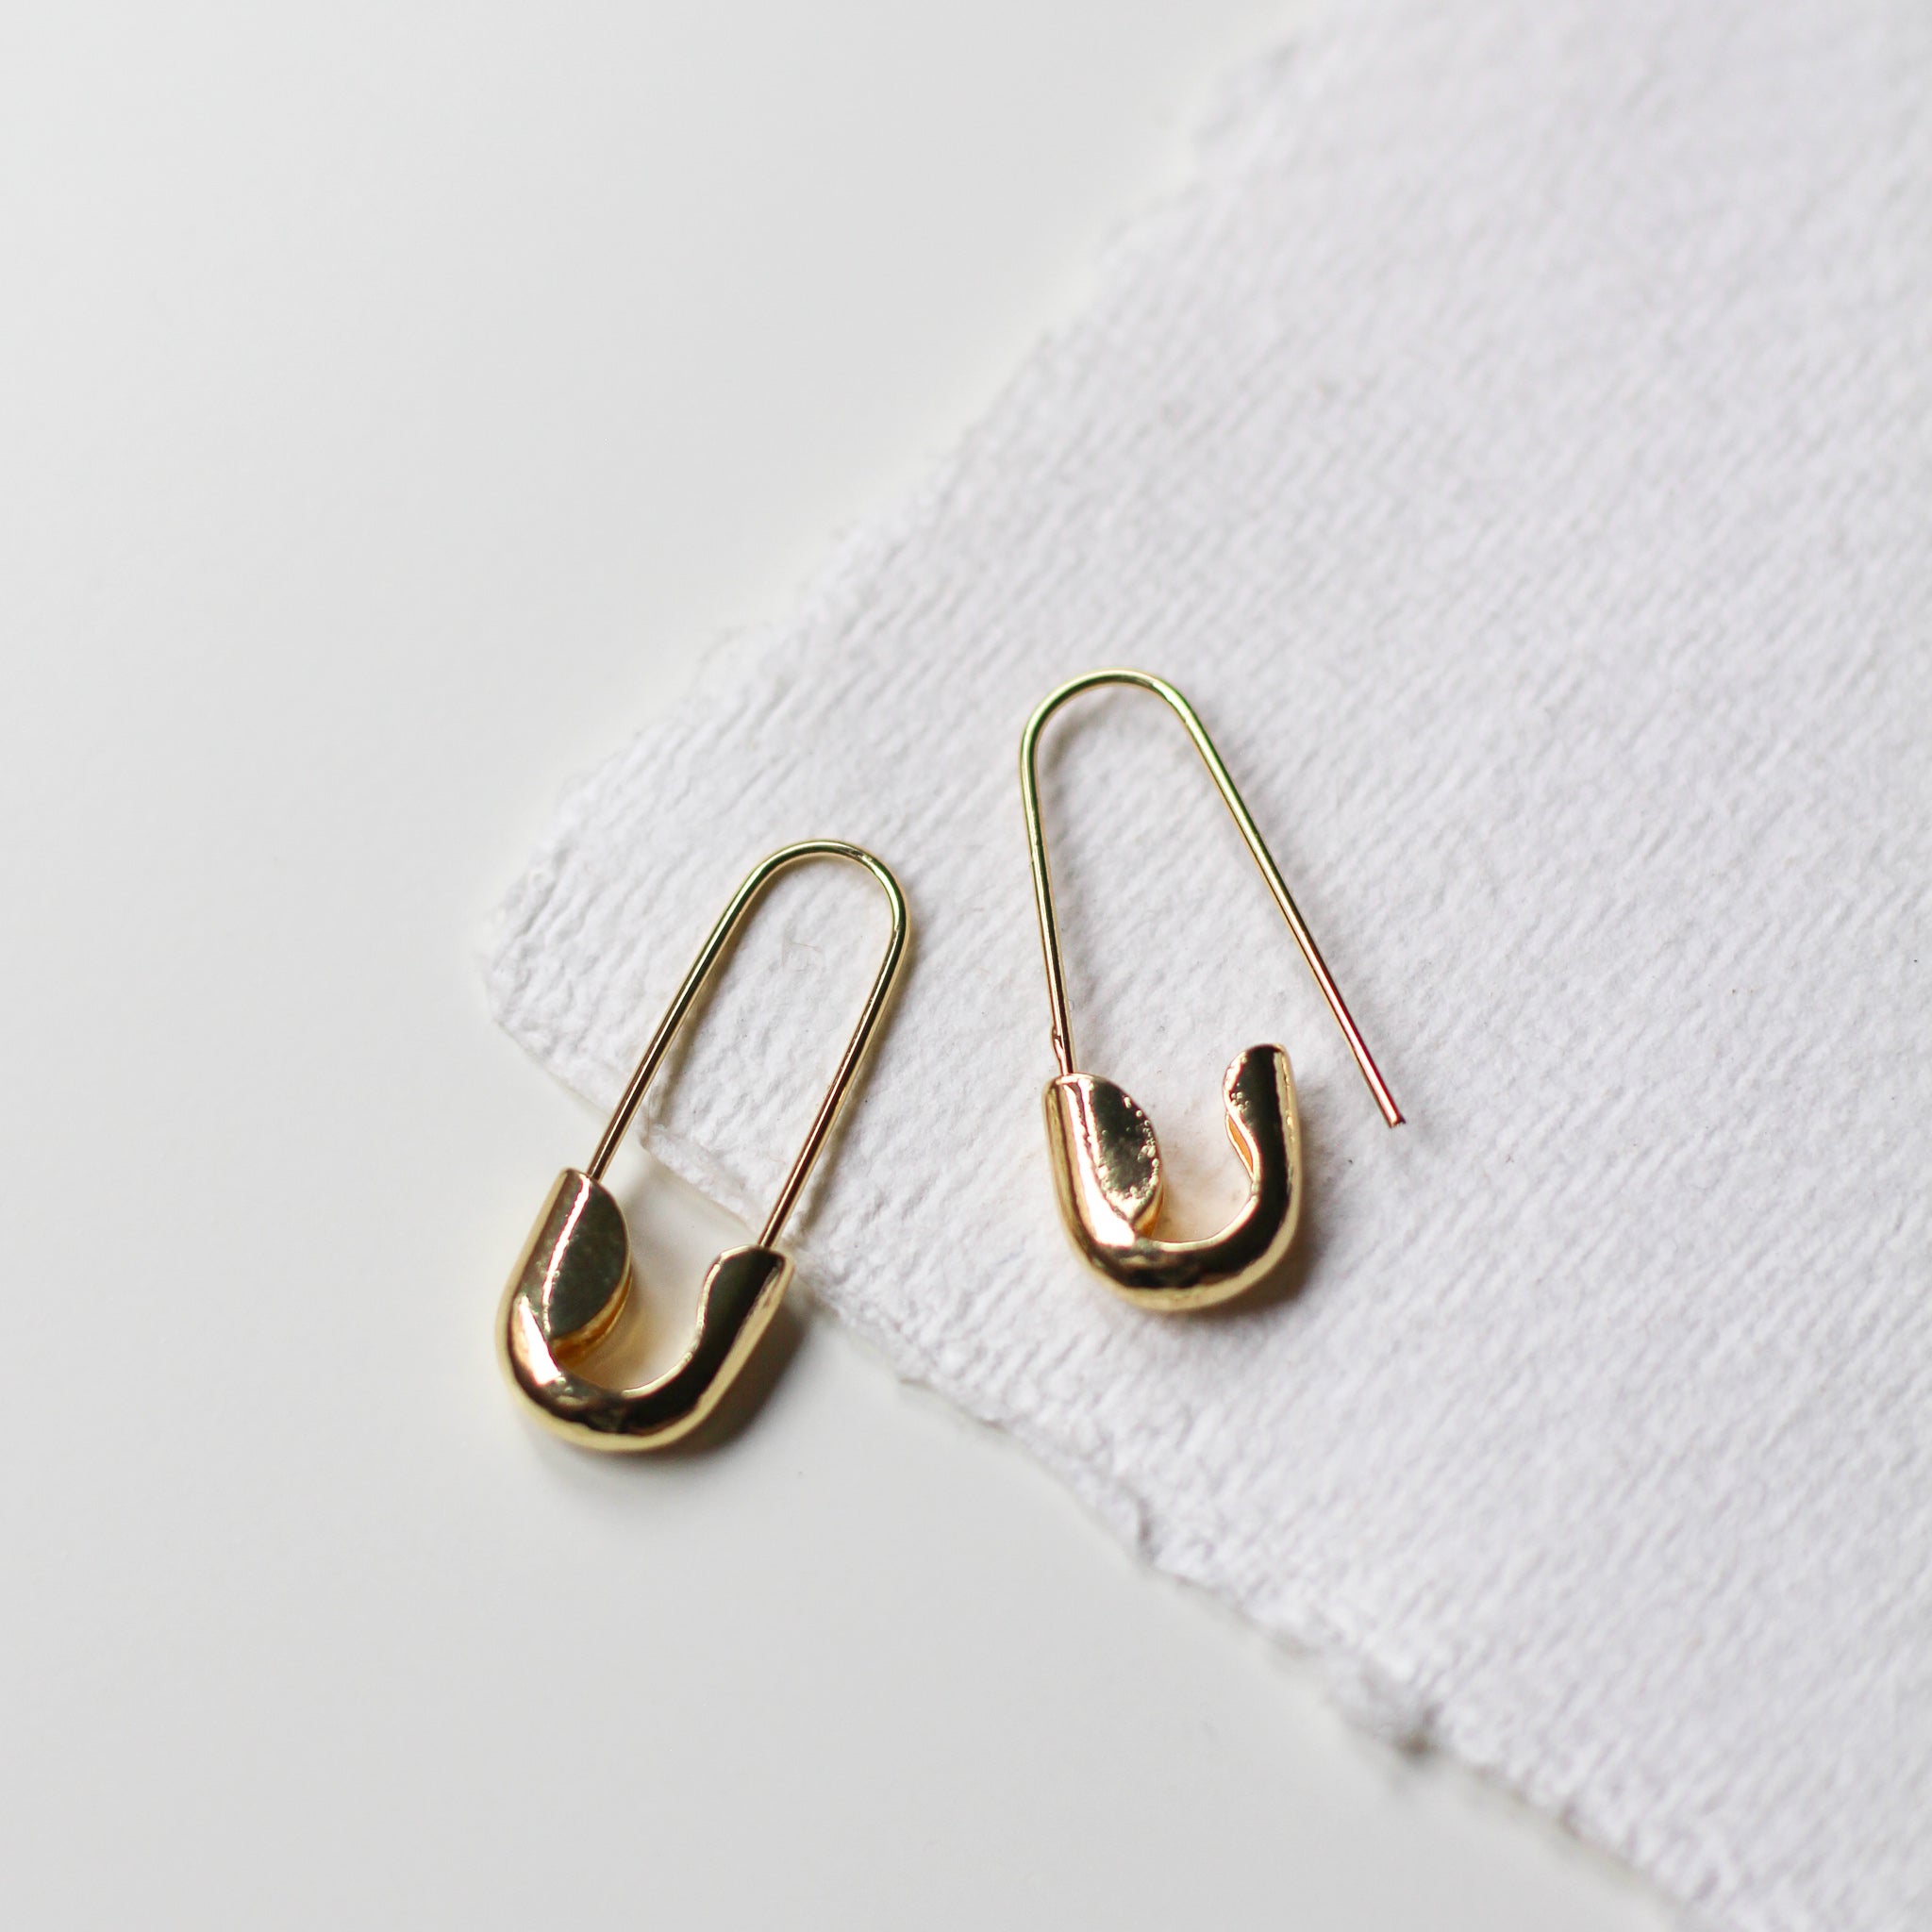 Safety Pin Earrings | ANDA